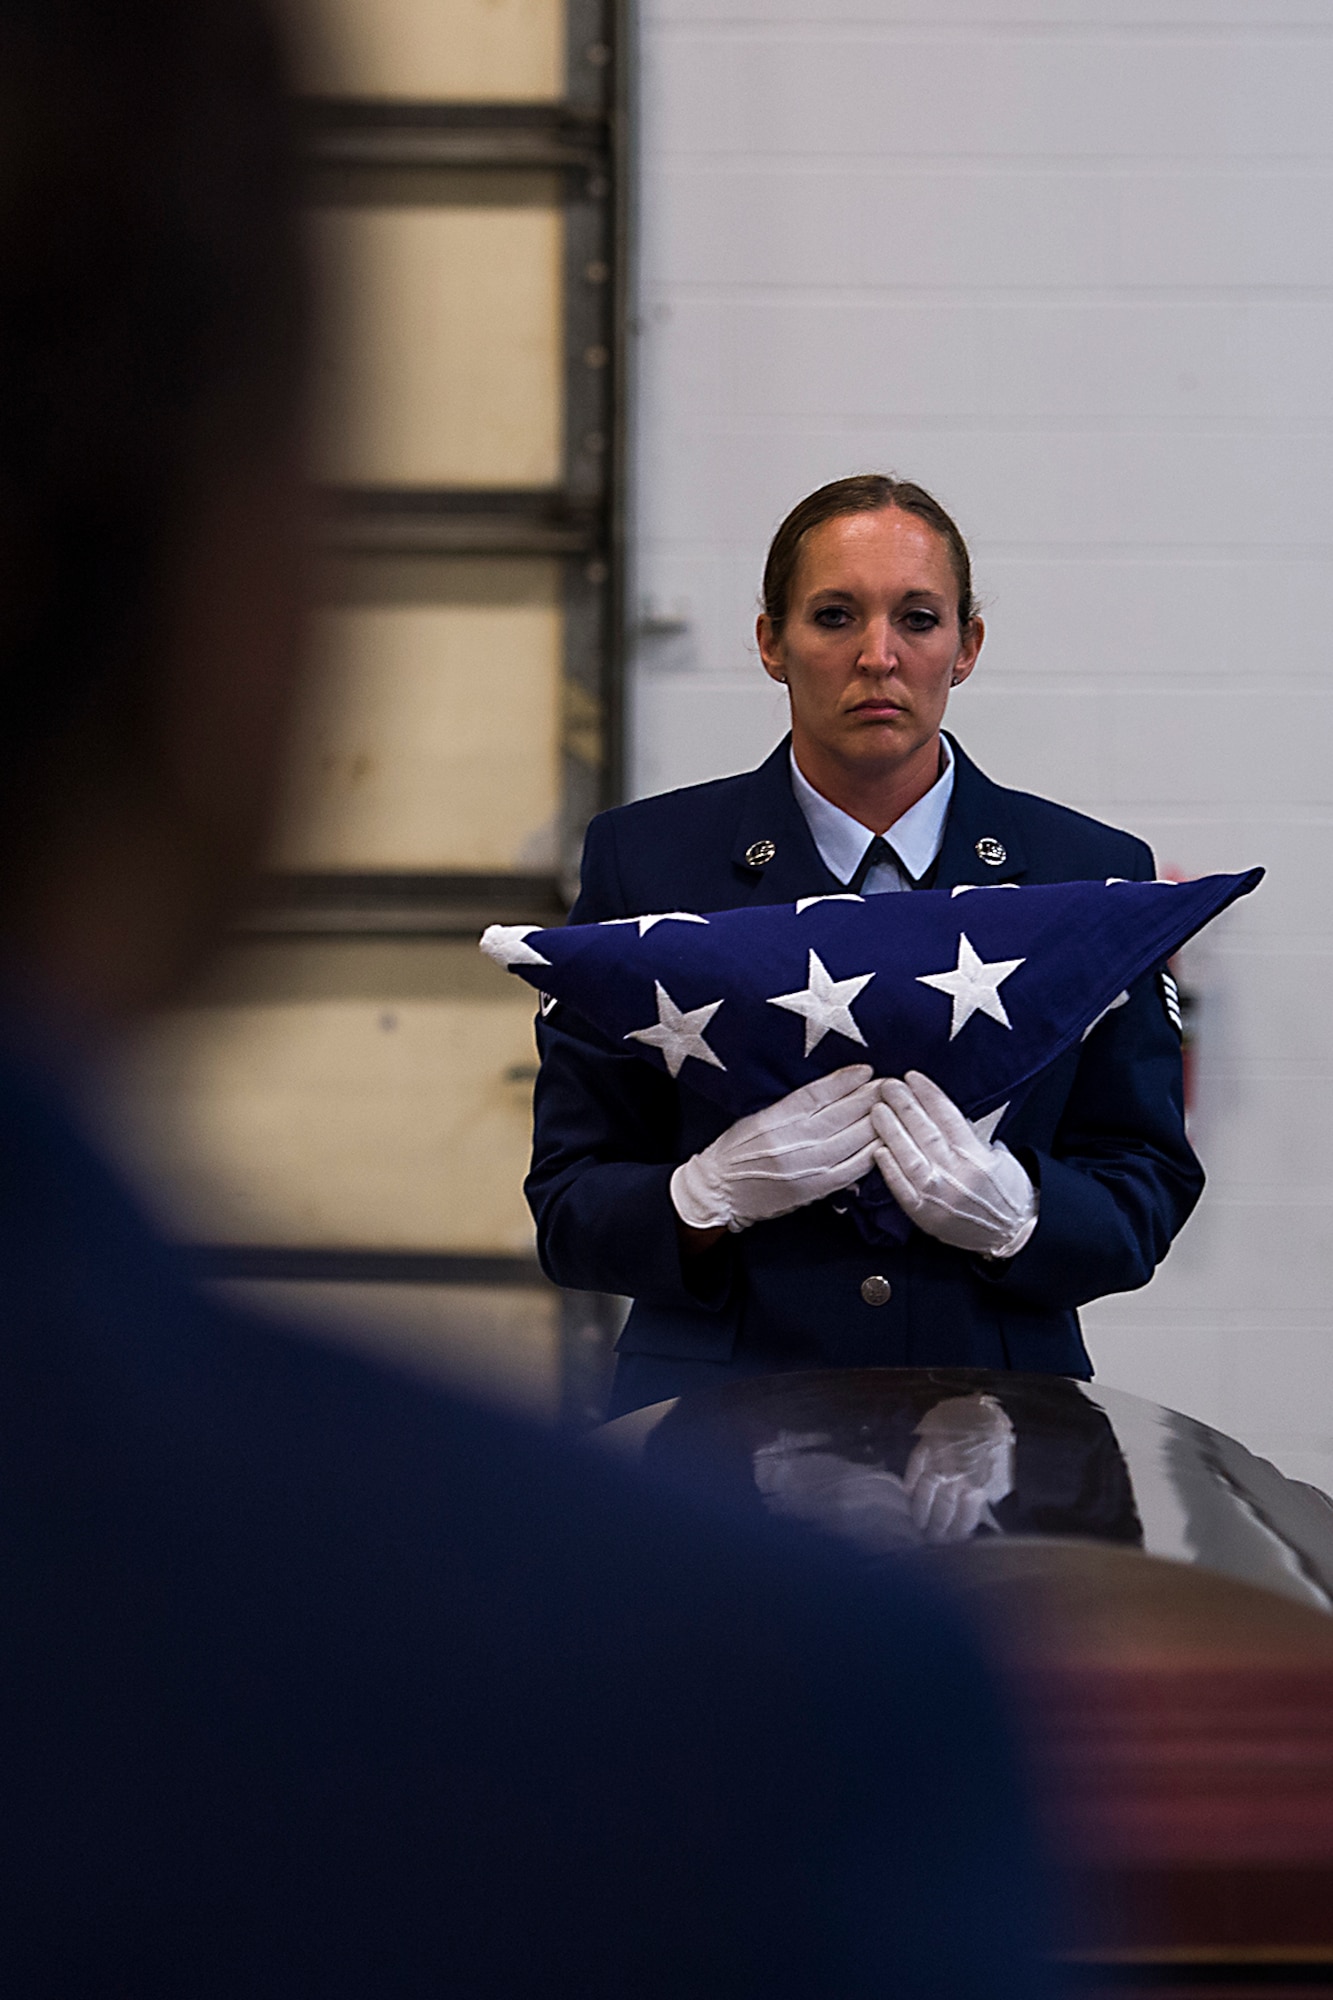 Staff Sgt. Brandie Bucinski, 434th Aircraft Maintenance Squadron, holds a flag following a demonstration of proper flag folding technique during an Honor Guard graduation ceremony July 15, 2016 at Grissom Air Reserve Base, Ind. Grissom’s Honor Guard primarily preforms funeral duties for military retirees and veterans. (U.S. Air Force photo/Senior Airman Dakota Bergl)